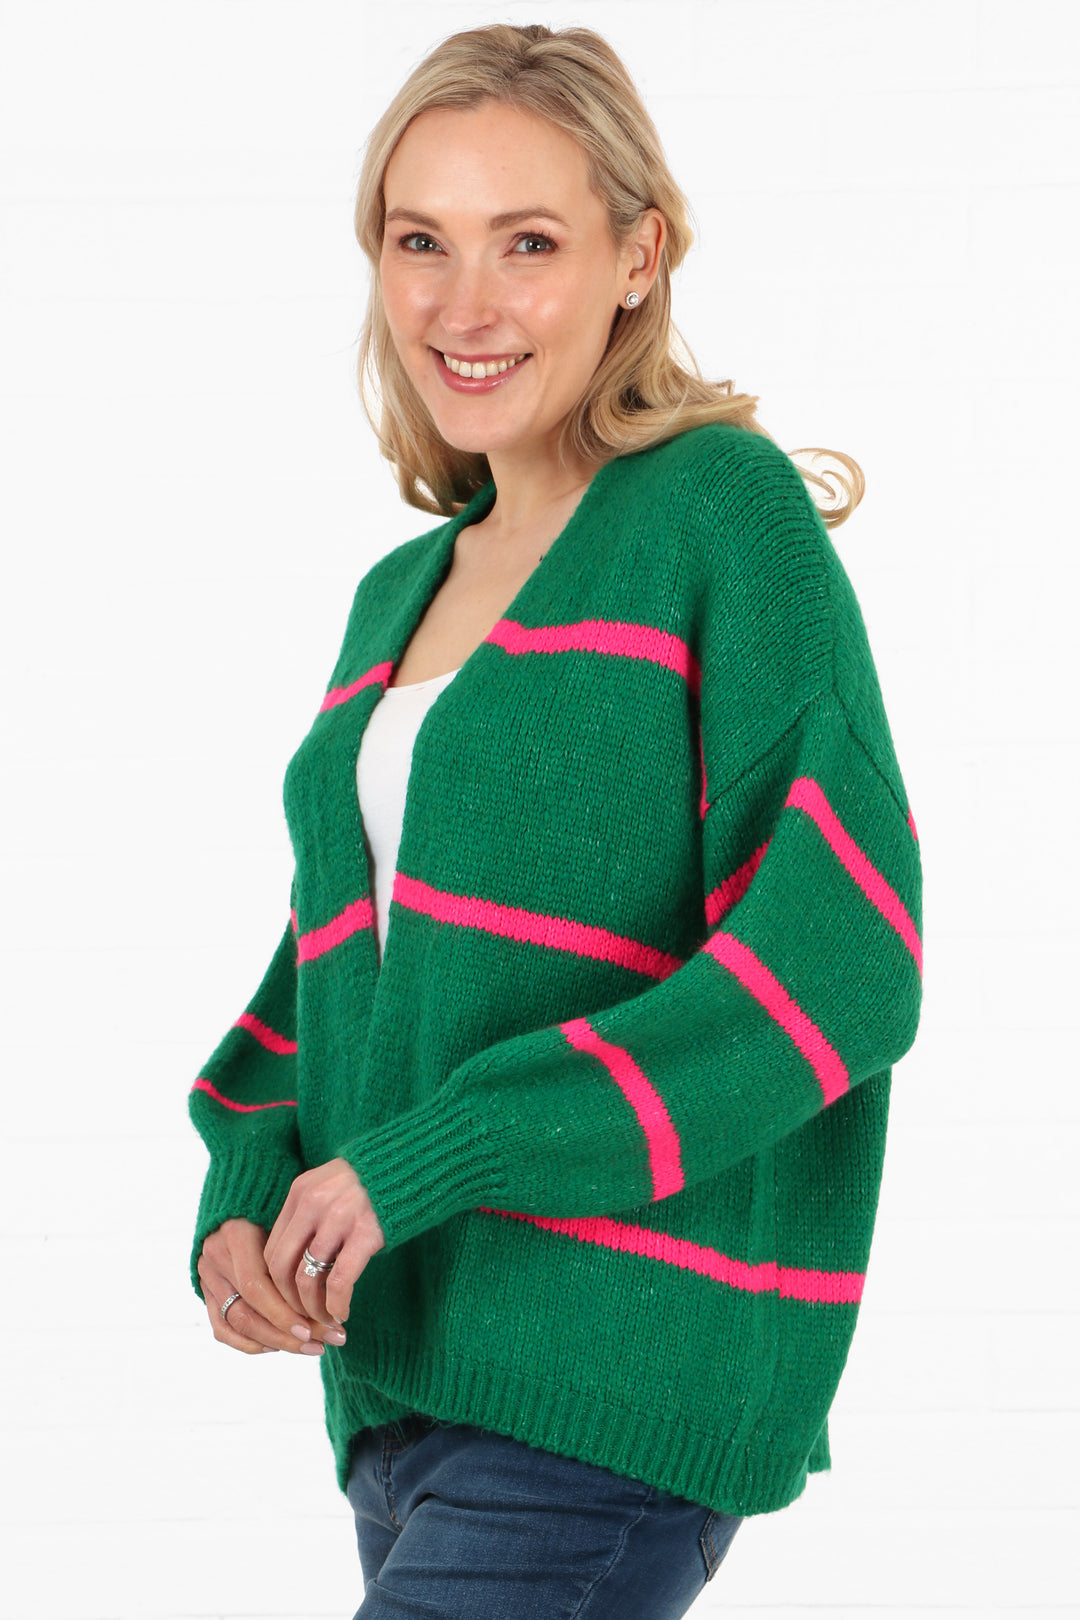 model showing a side view of the cardigan, showing that the sleeves also have the three pink stripes on them